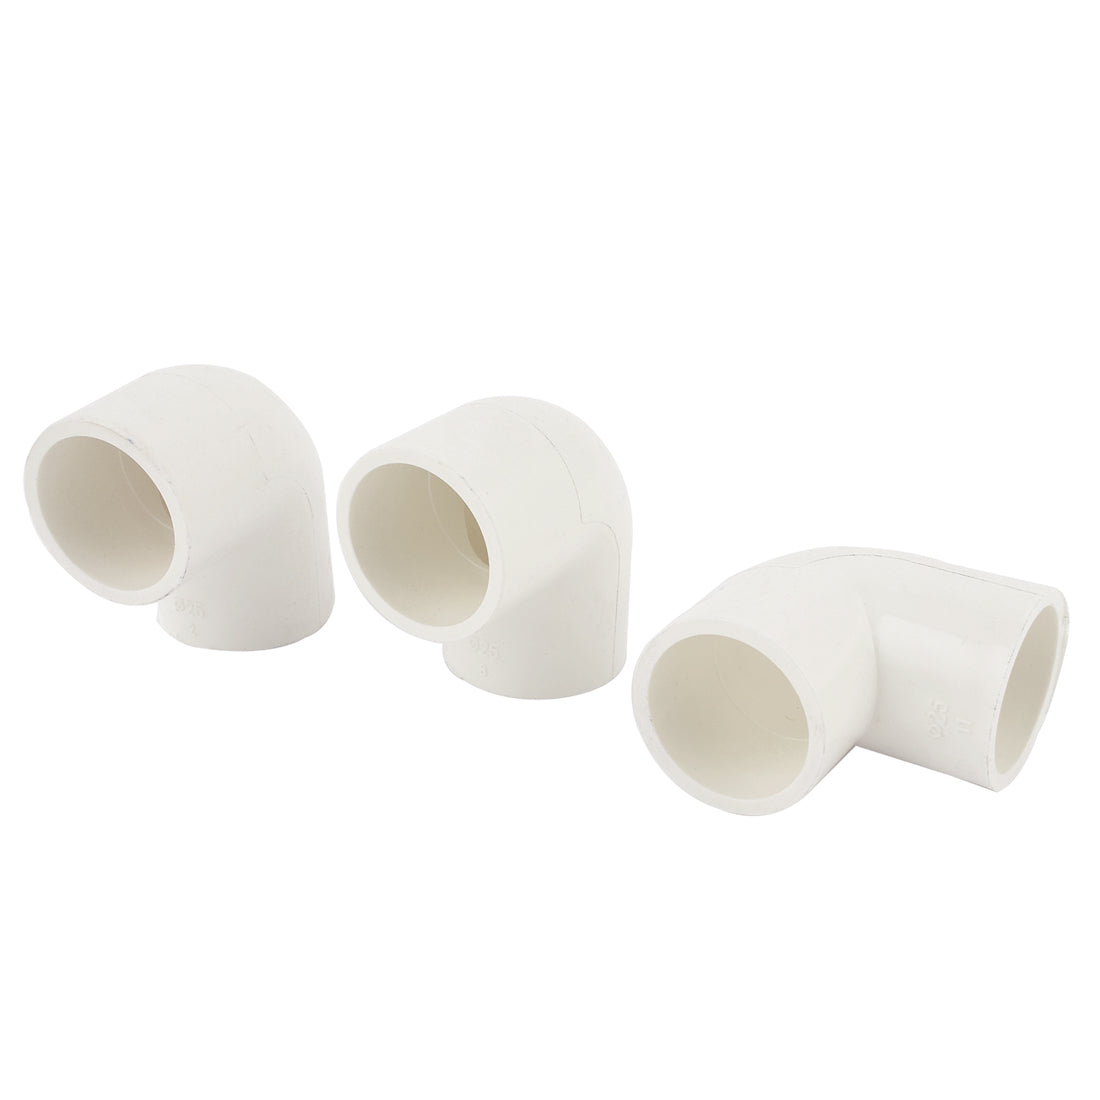 uxcell Uxcell U-PVC 25mm Hole Dia 90 Degree Elbow 2 Ways Pipe Connector White 3 Pcs